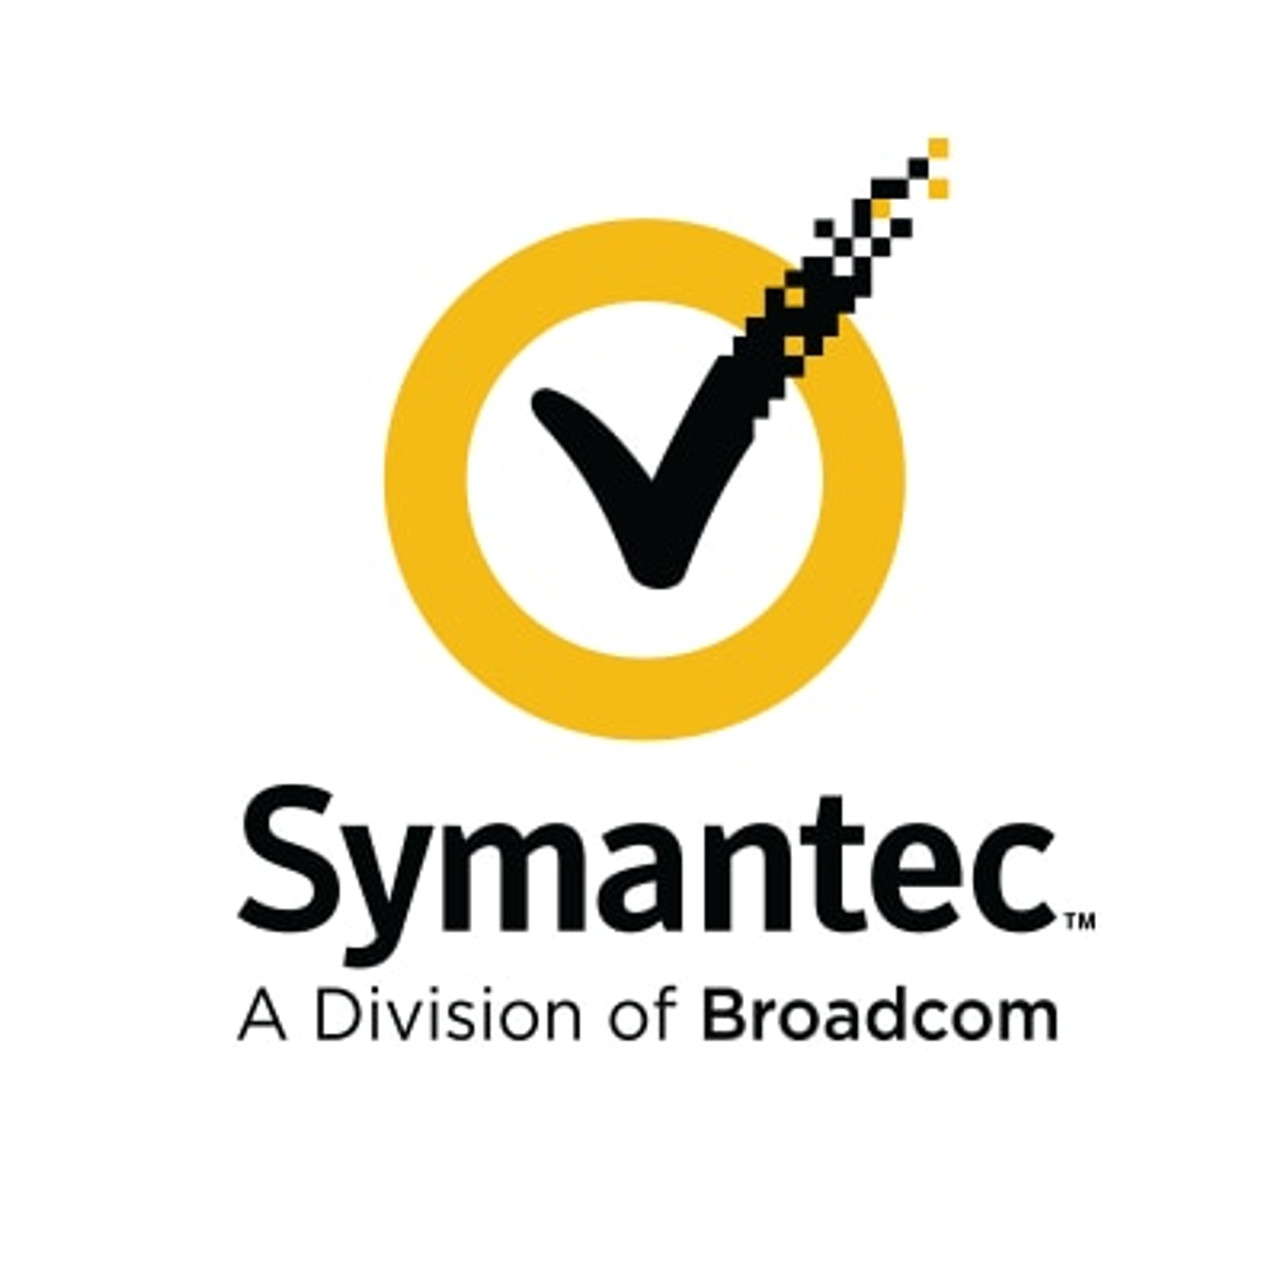 Symantec Complete Endpoint Defense (without SEP), Initial Hybrid Subscription License with Support, 500-999 Devices 3 YR